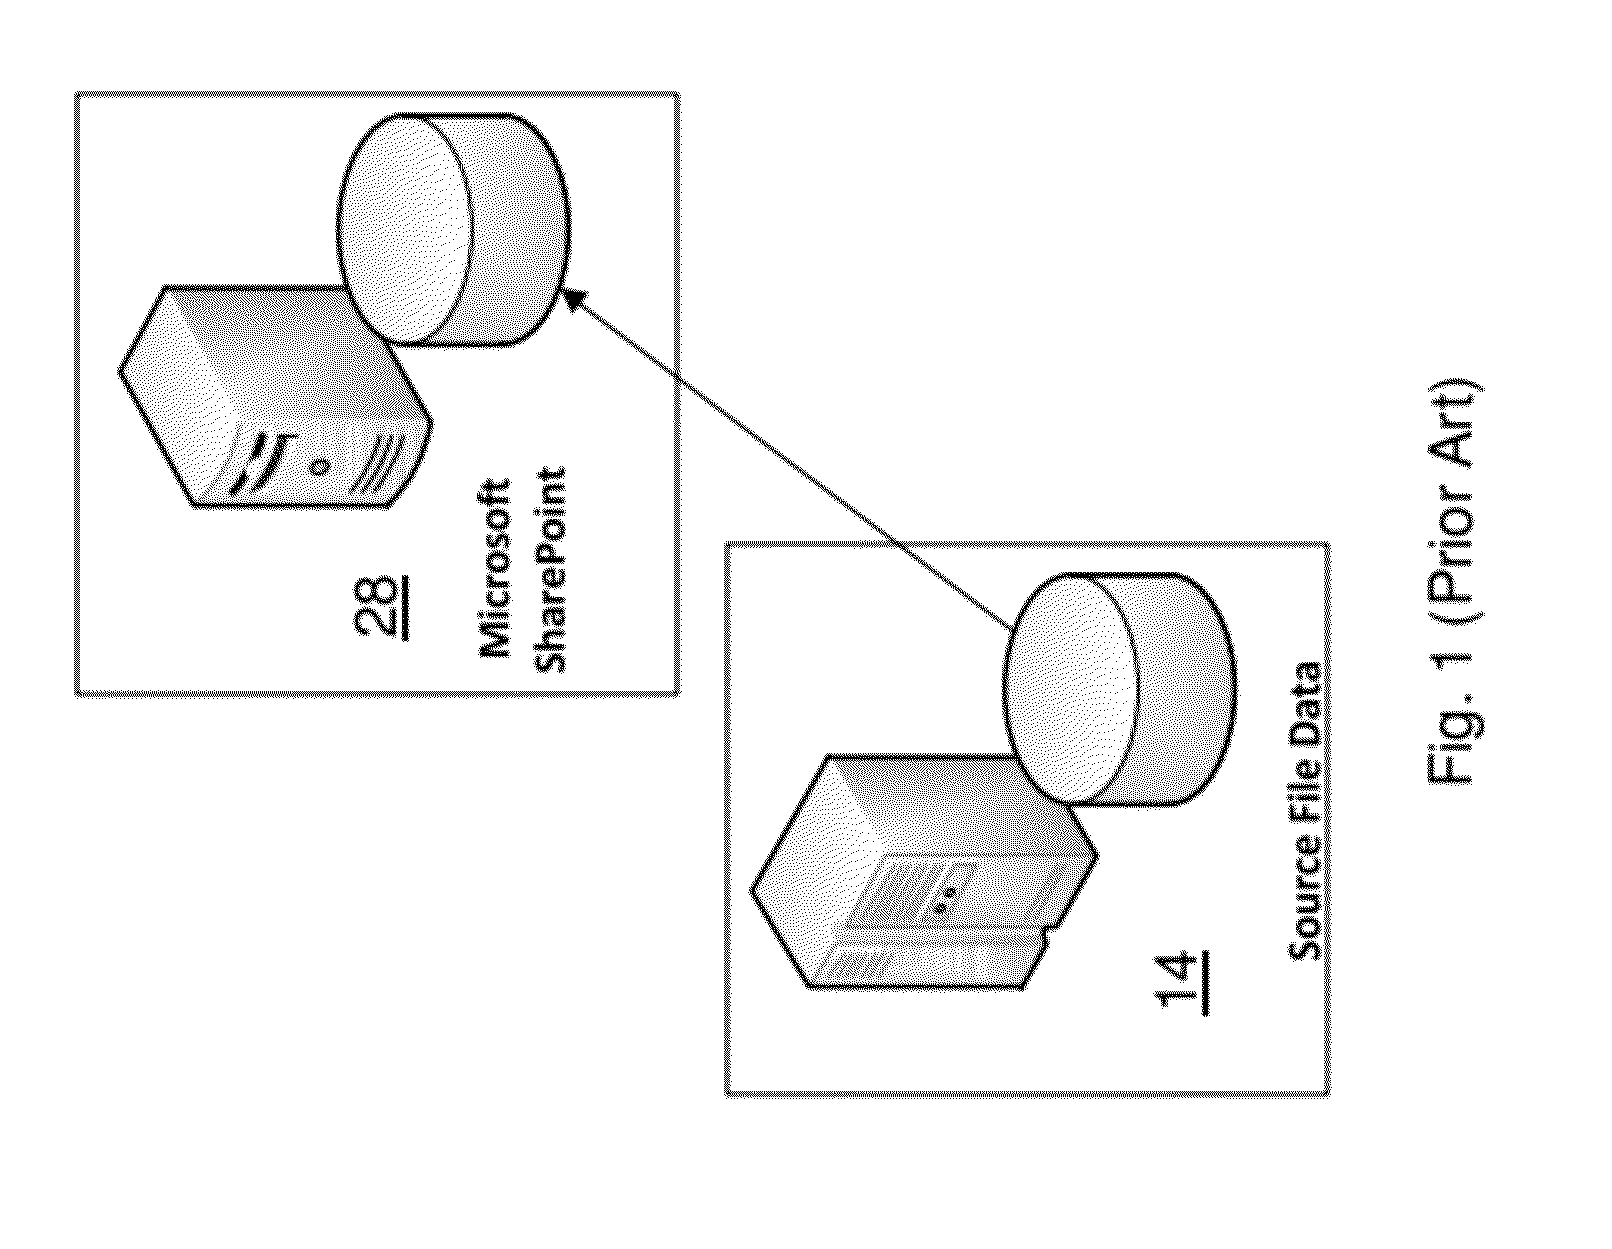 System and Method for In-Place Data Migration